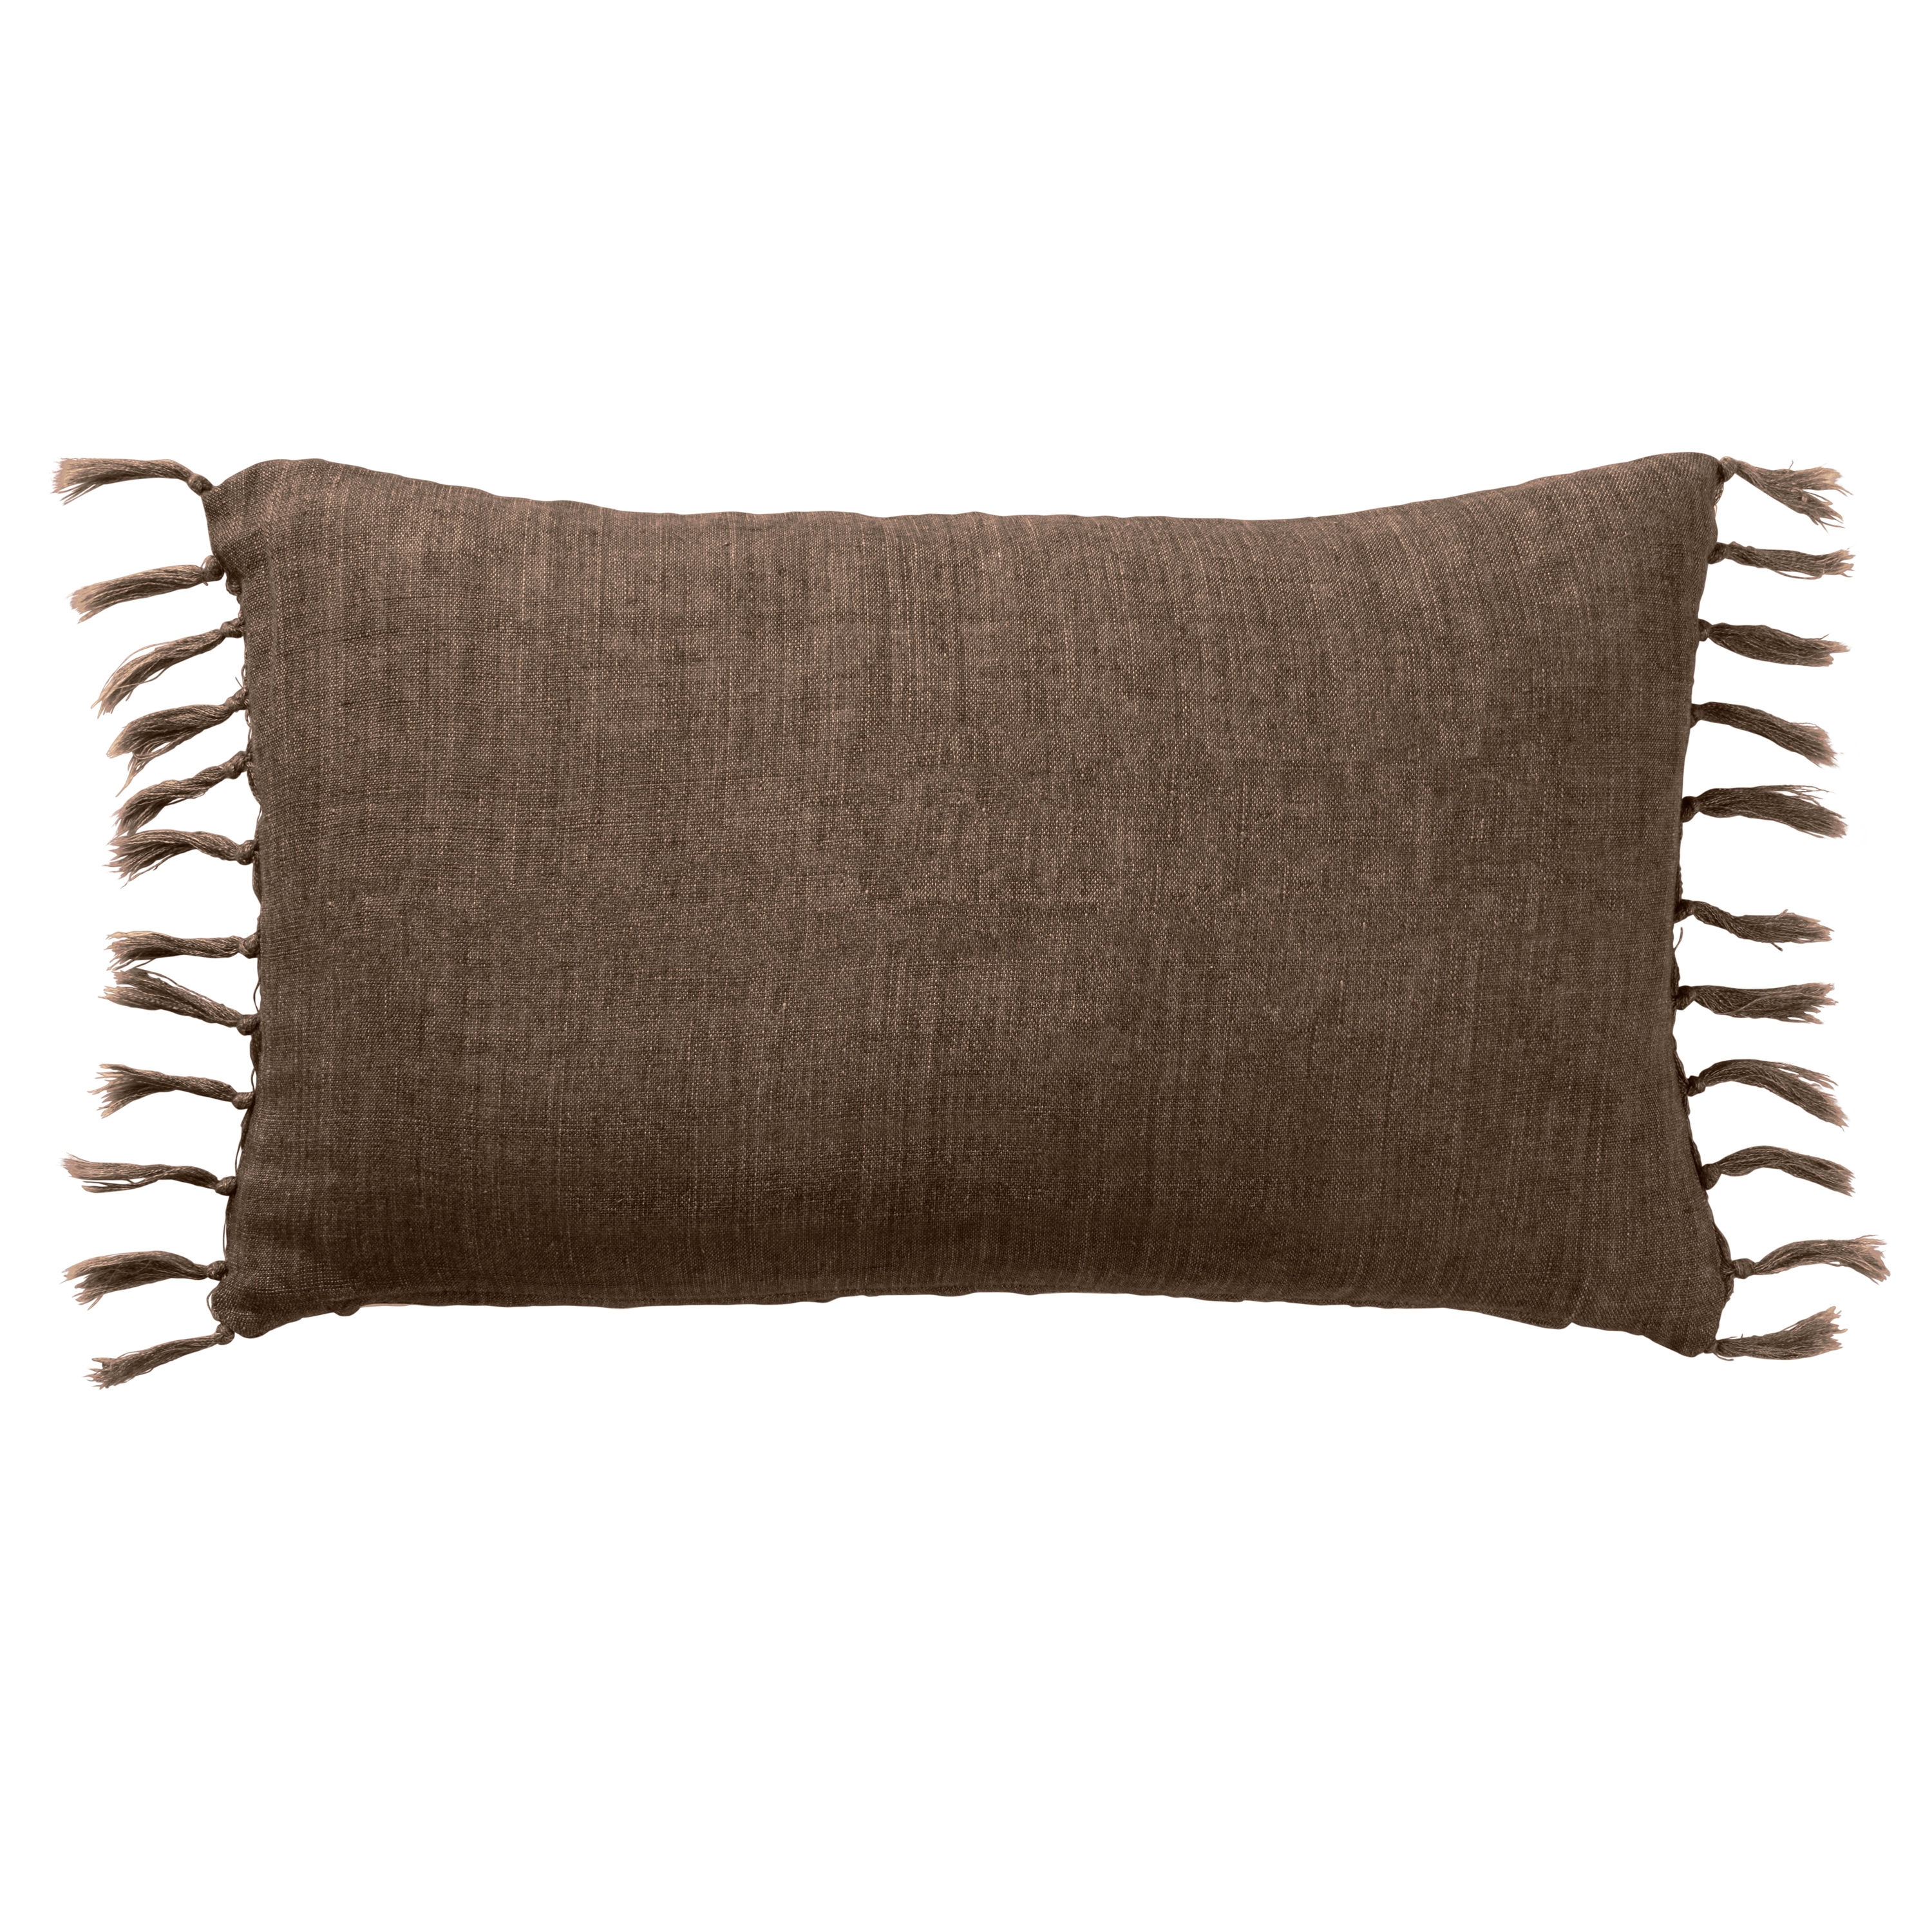 Design (US) Brown 13"X21" Pillow POLY insert - Image 1